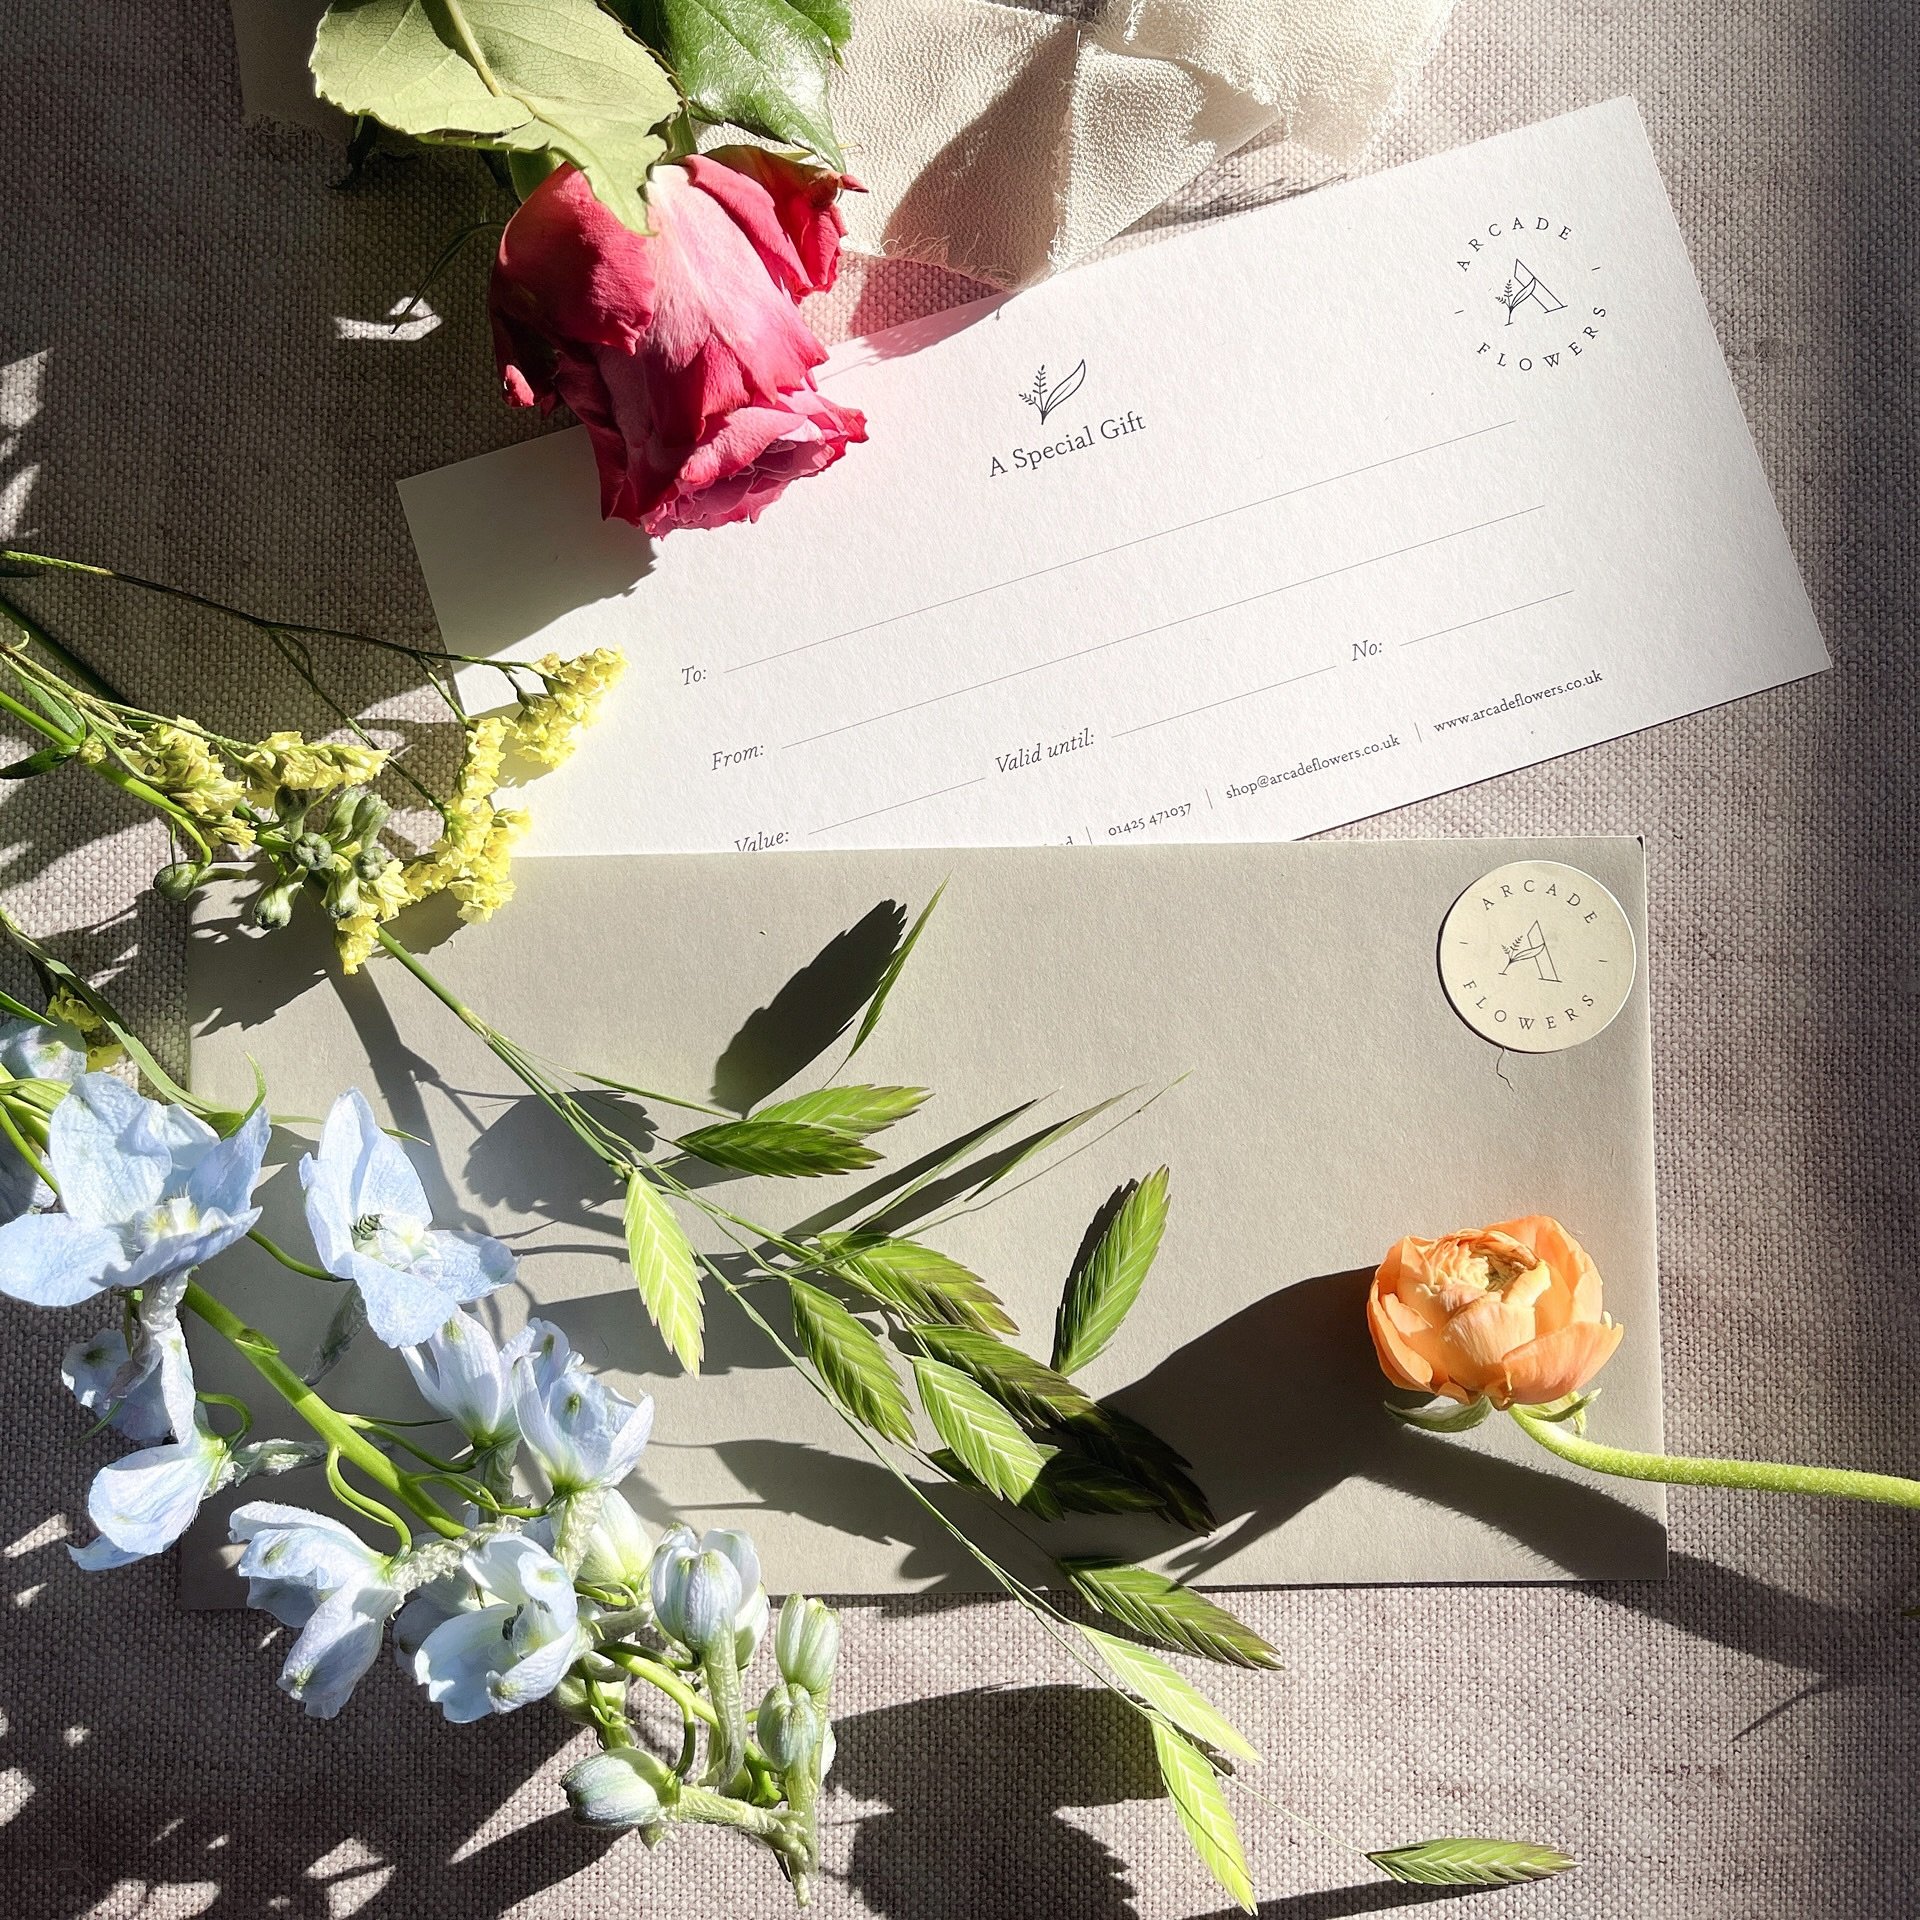 Stuck for spring and summer gift ideas for friends and loved ones? You can order one of our floral gift vouchers and let them choose their own flowers and when they get delivered - head to the link in today&rsquo;s Stories to order yours...
.
.
#flor